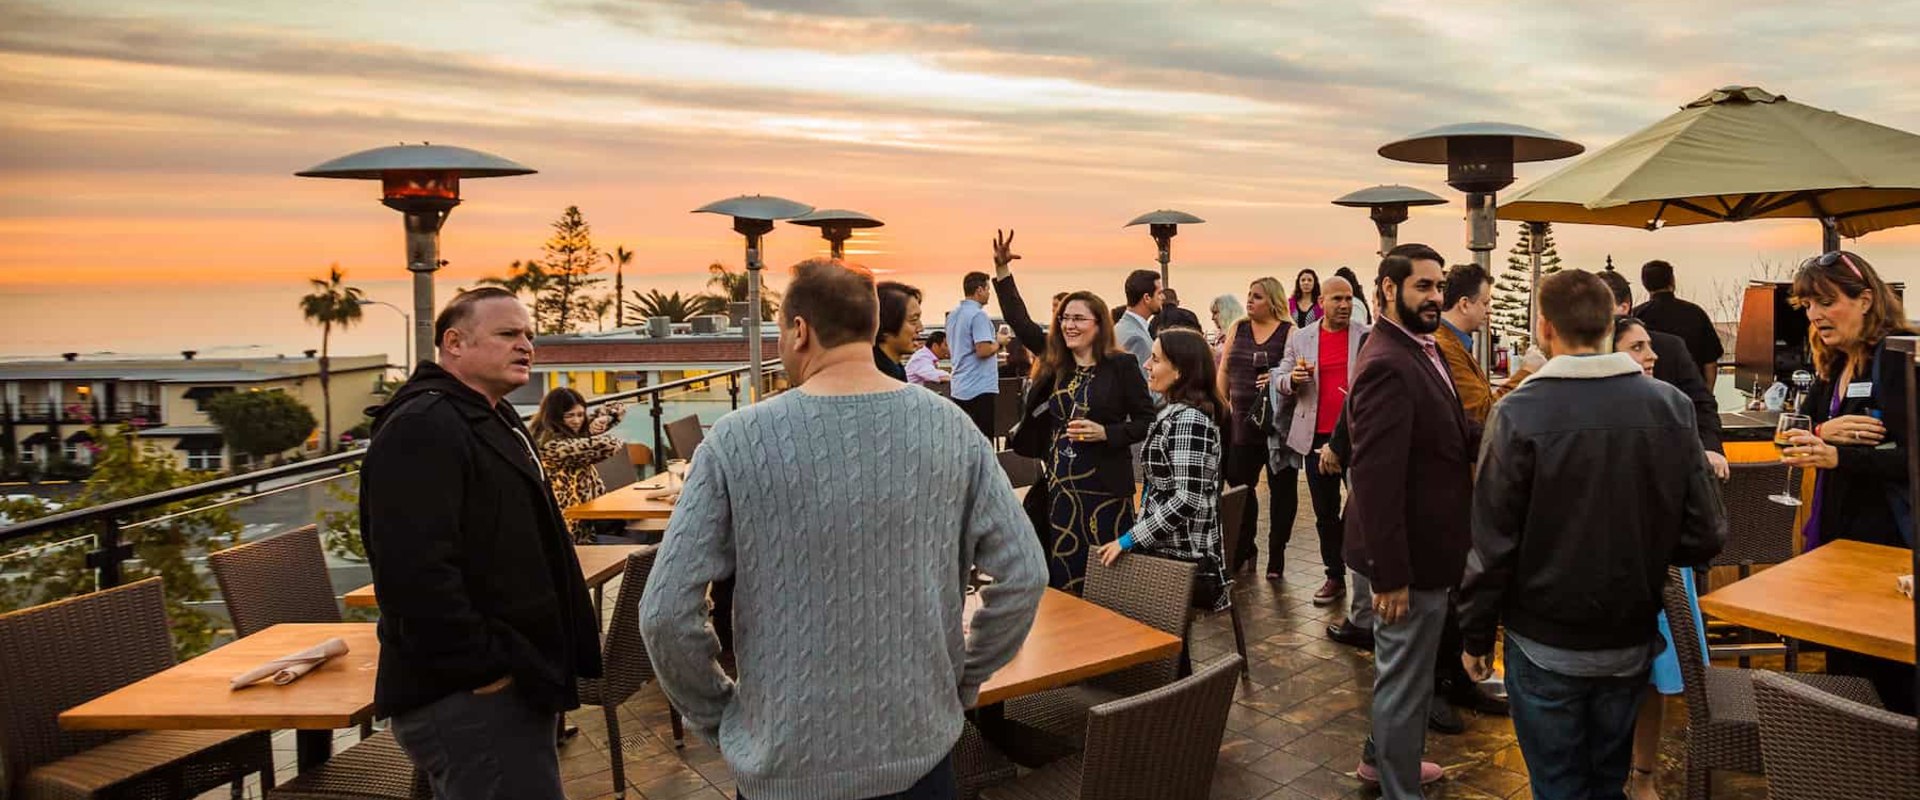 The Ultimate Guide to Orange County, CA Restaurants with Live Music